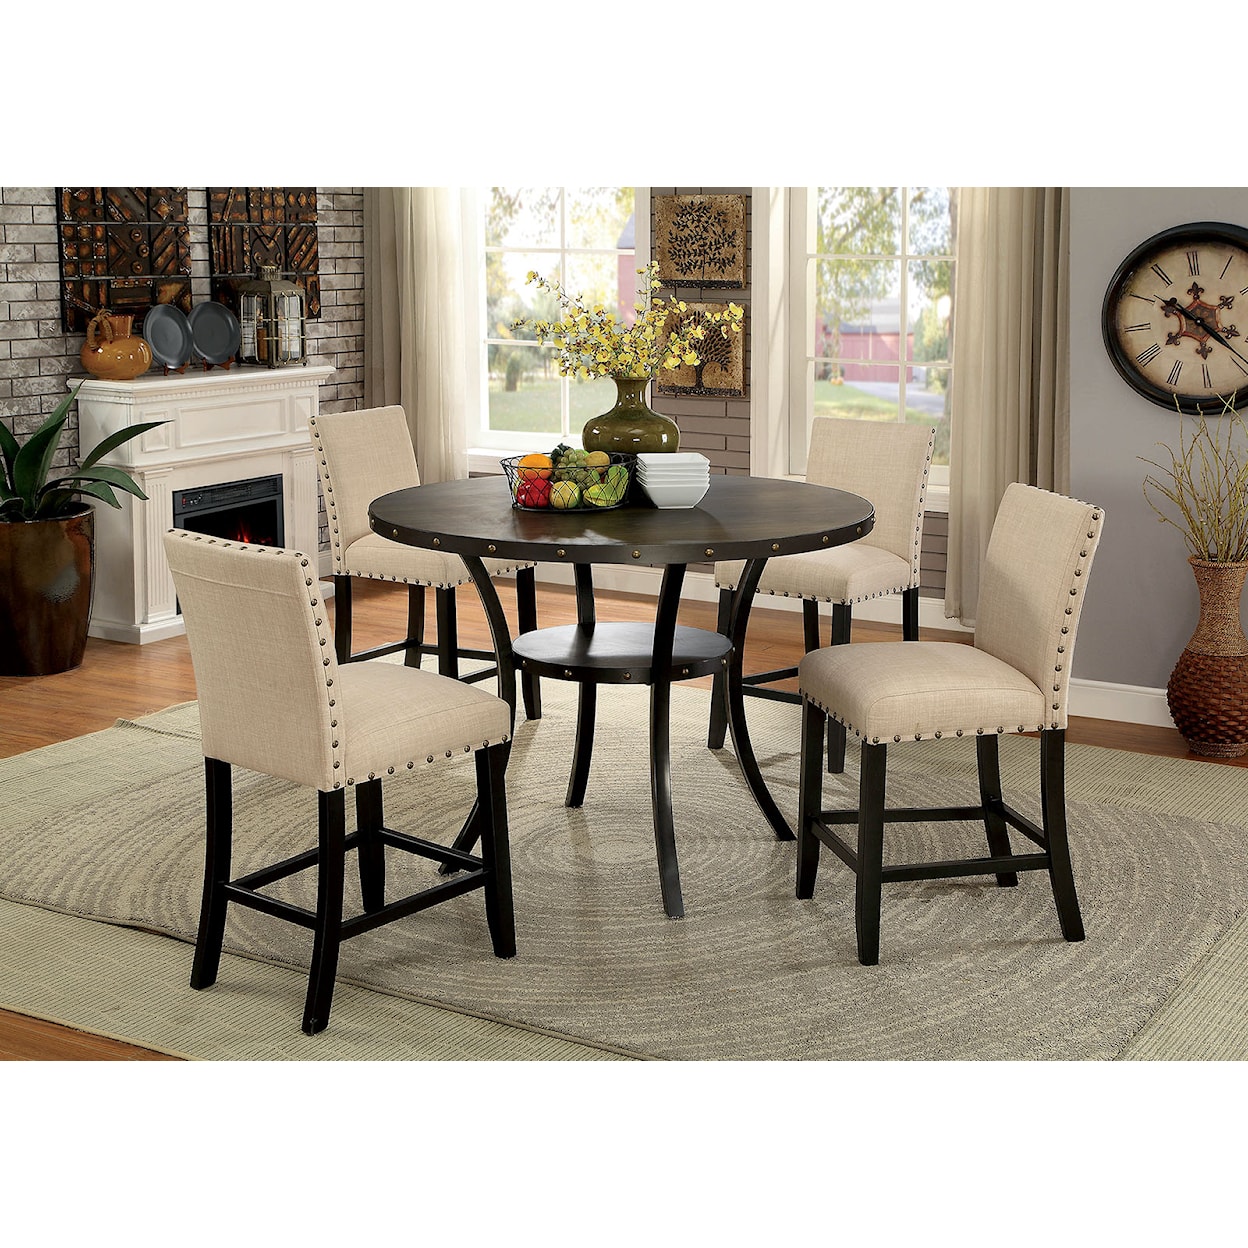 FUSA Kaitlin 5-Piece Round Counter Height Table Set